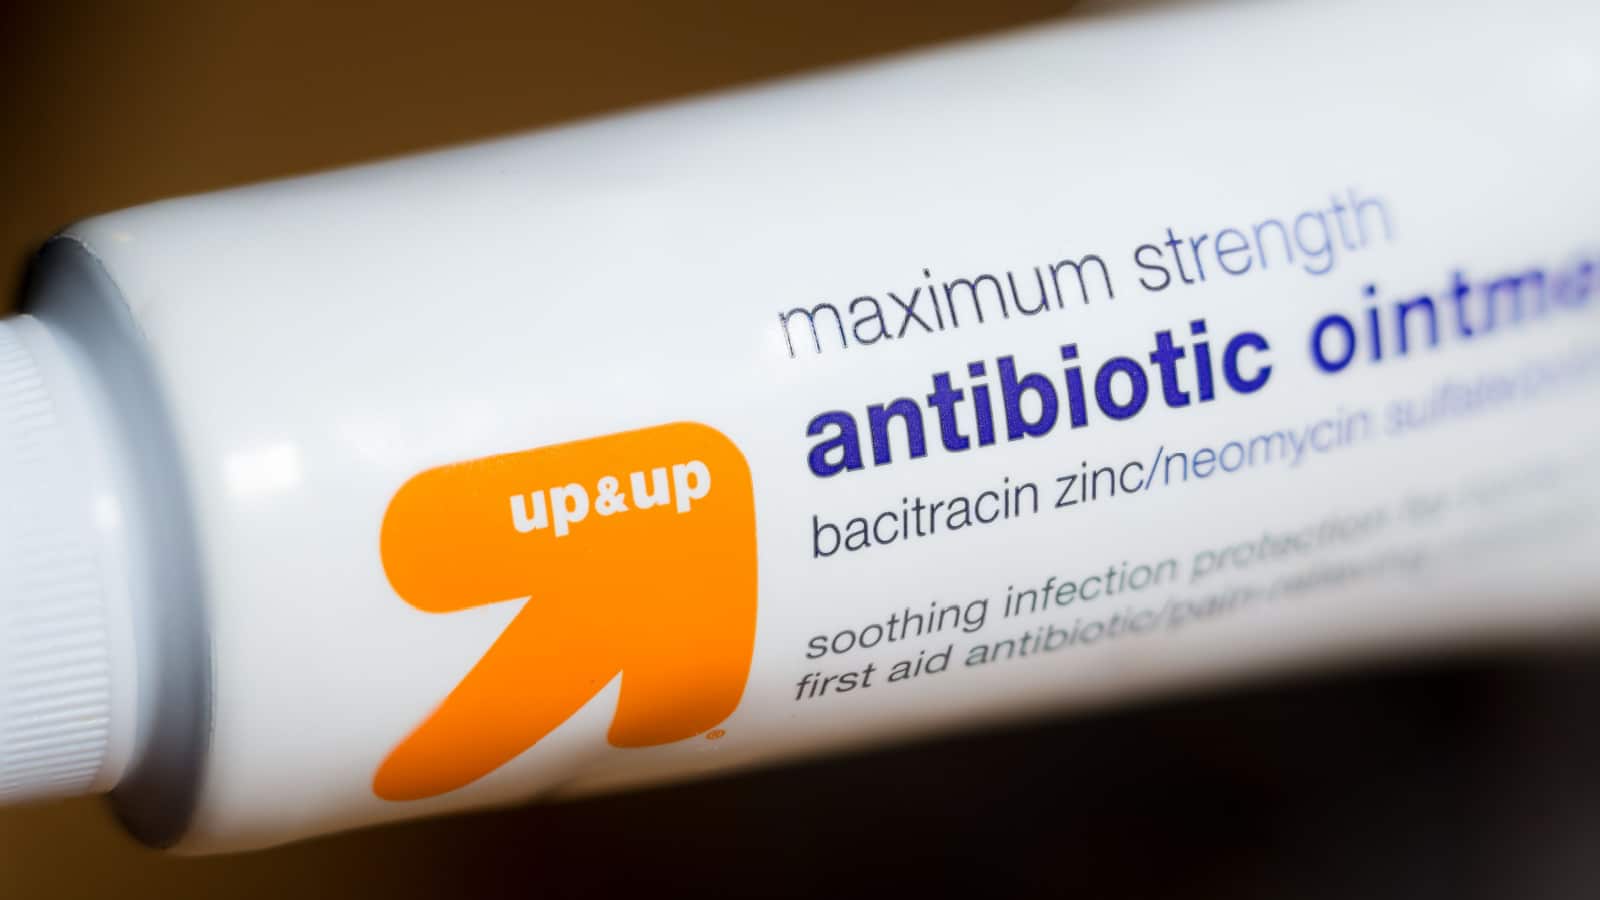 Trenton, MO / United States of America - September 9th, 2020 : Up & Up brand antibiotic ointment bottle, close up with dark background. Target store brand over the counter relief cream.